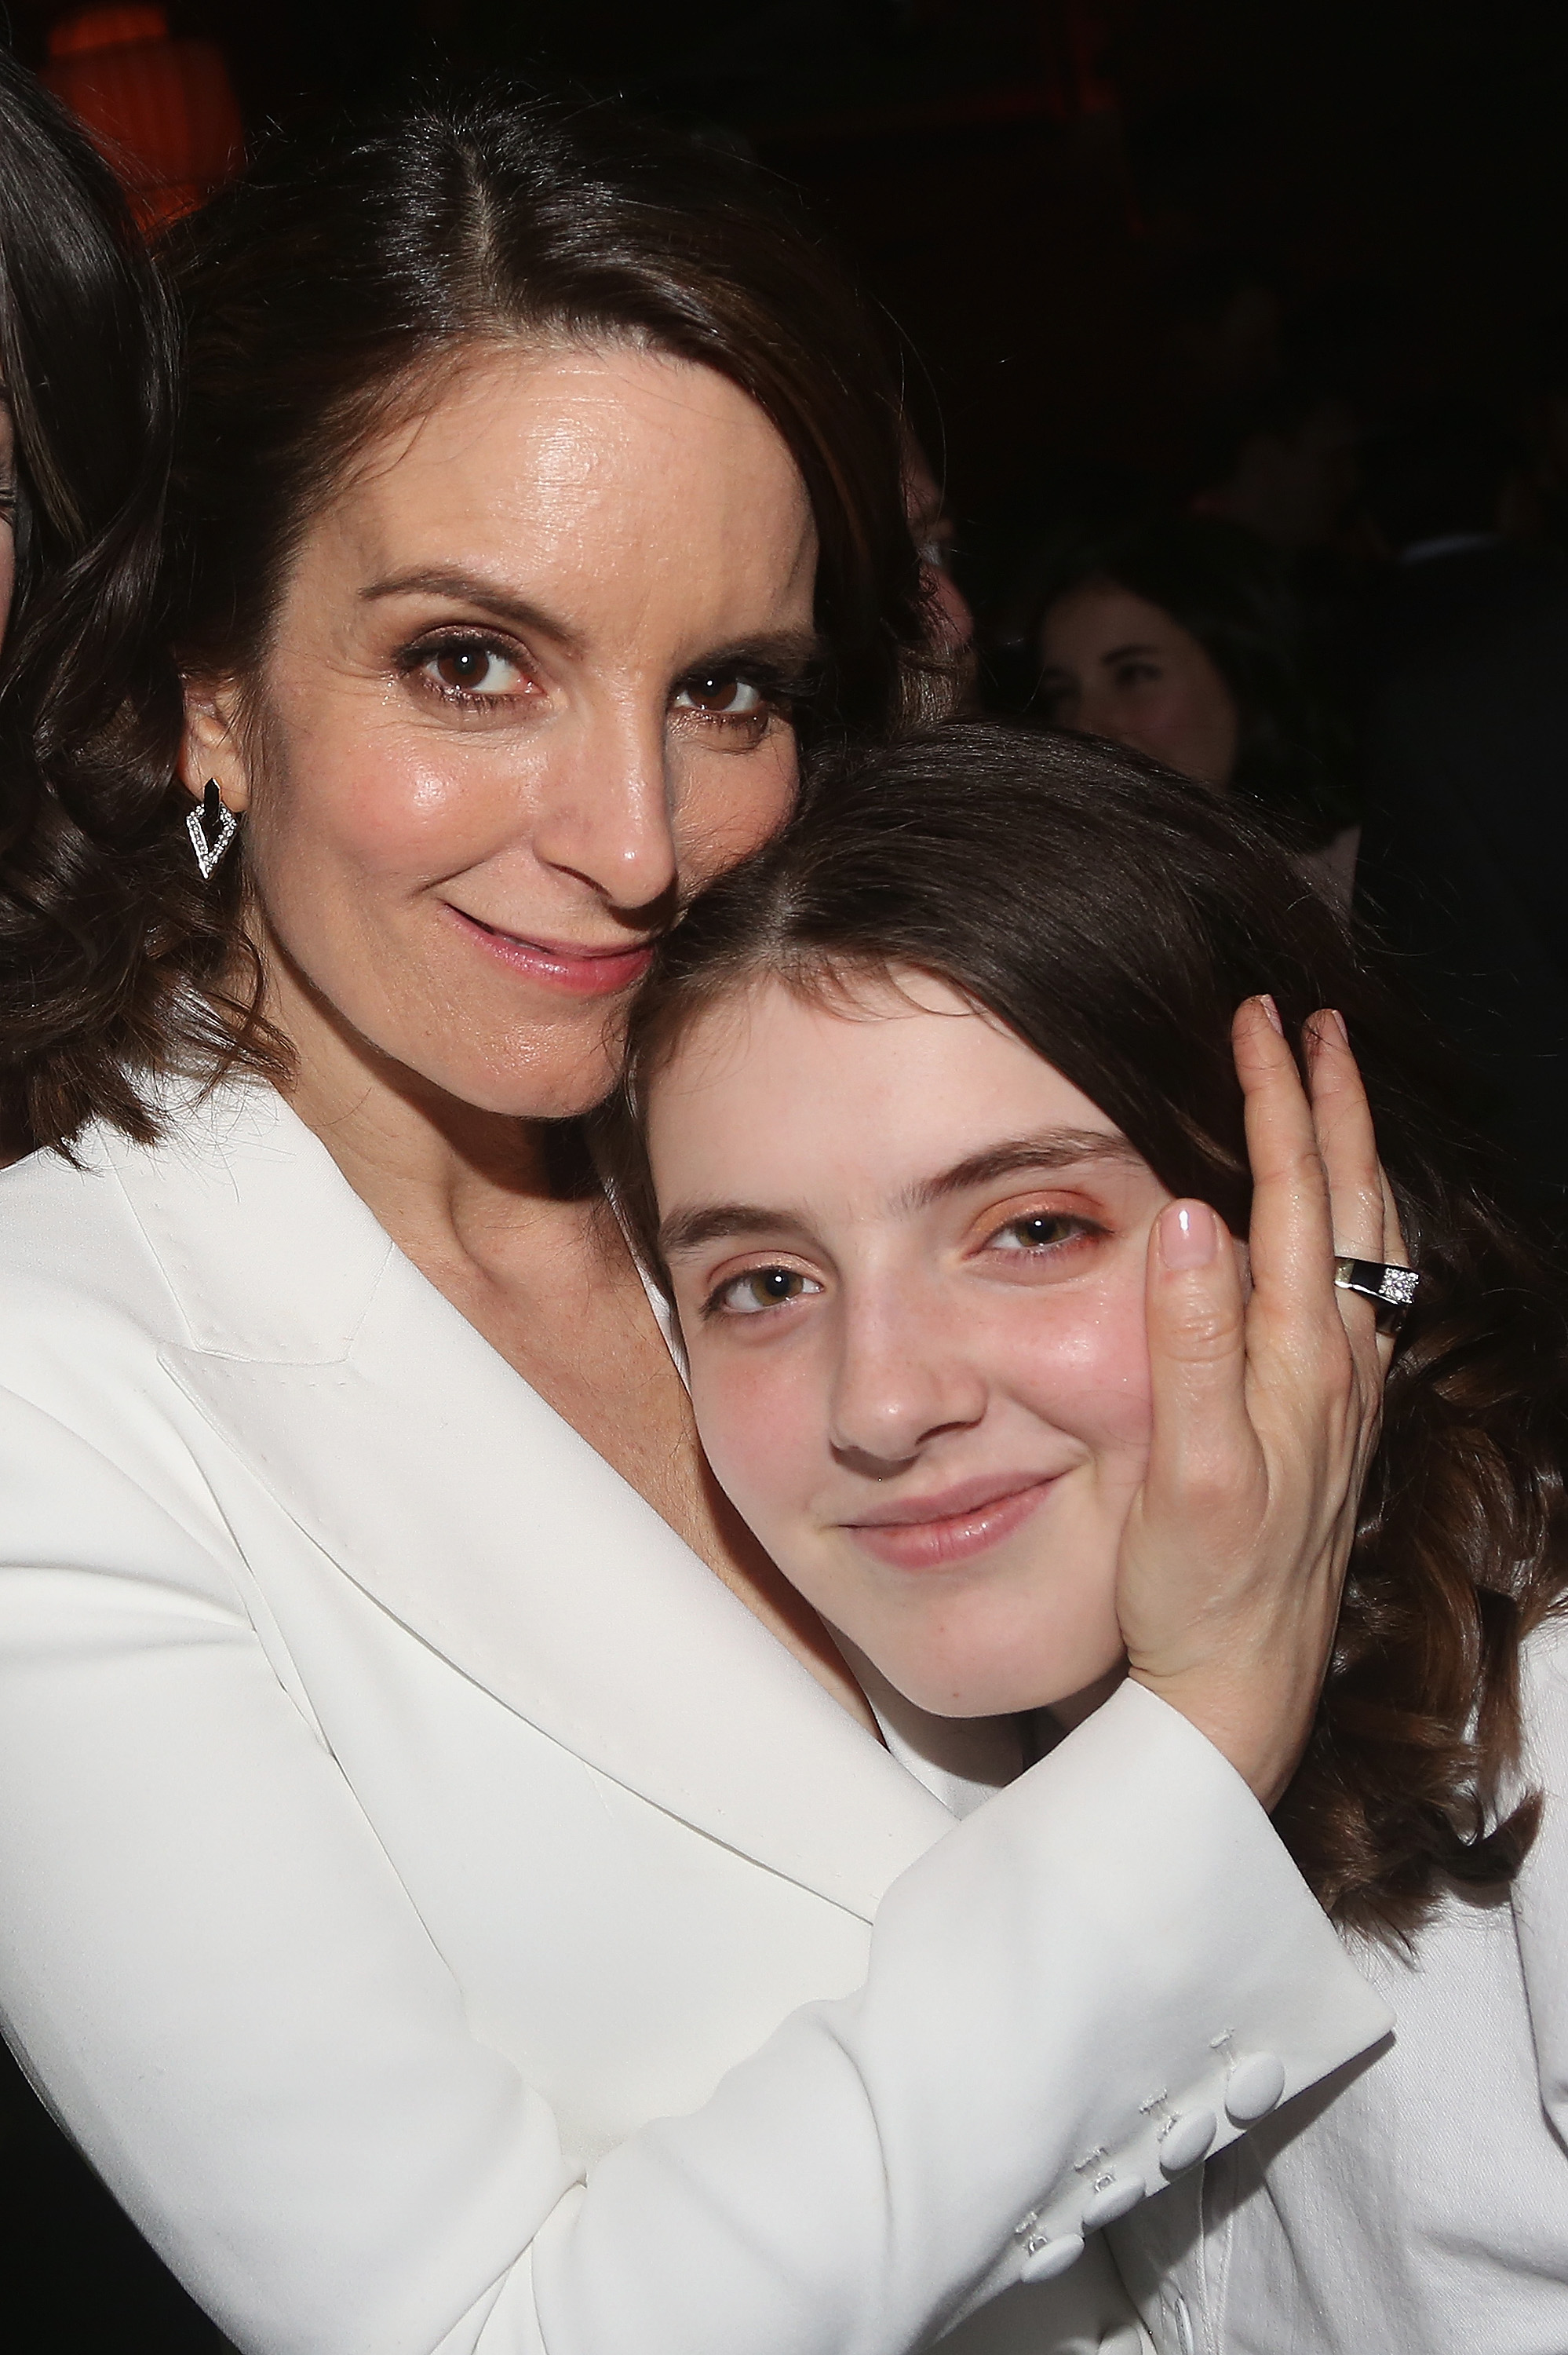 Tina Fey and her daughter Alice Zenobia Richmond pose at the opening night after party for the new musical "Mean Girls" on Broadway based on the cult film at TAO Downtown on April 8, 2018, in New York City. | Source: Getty Images